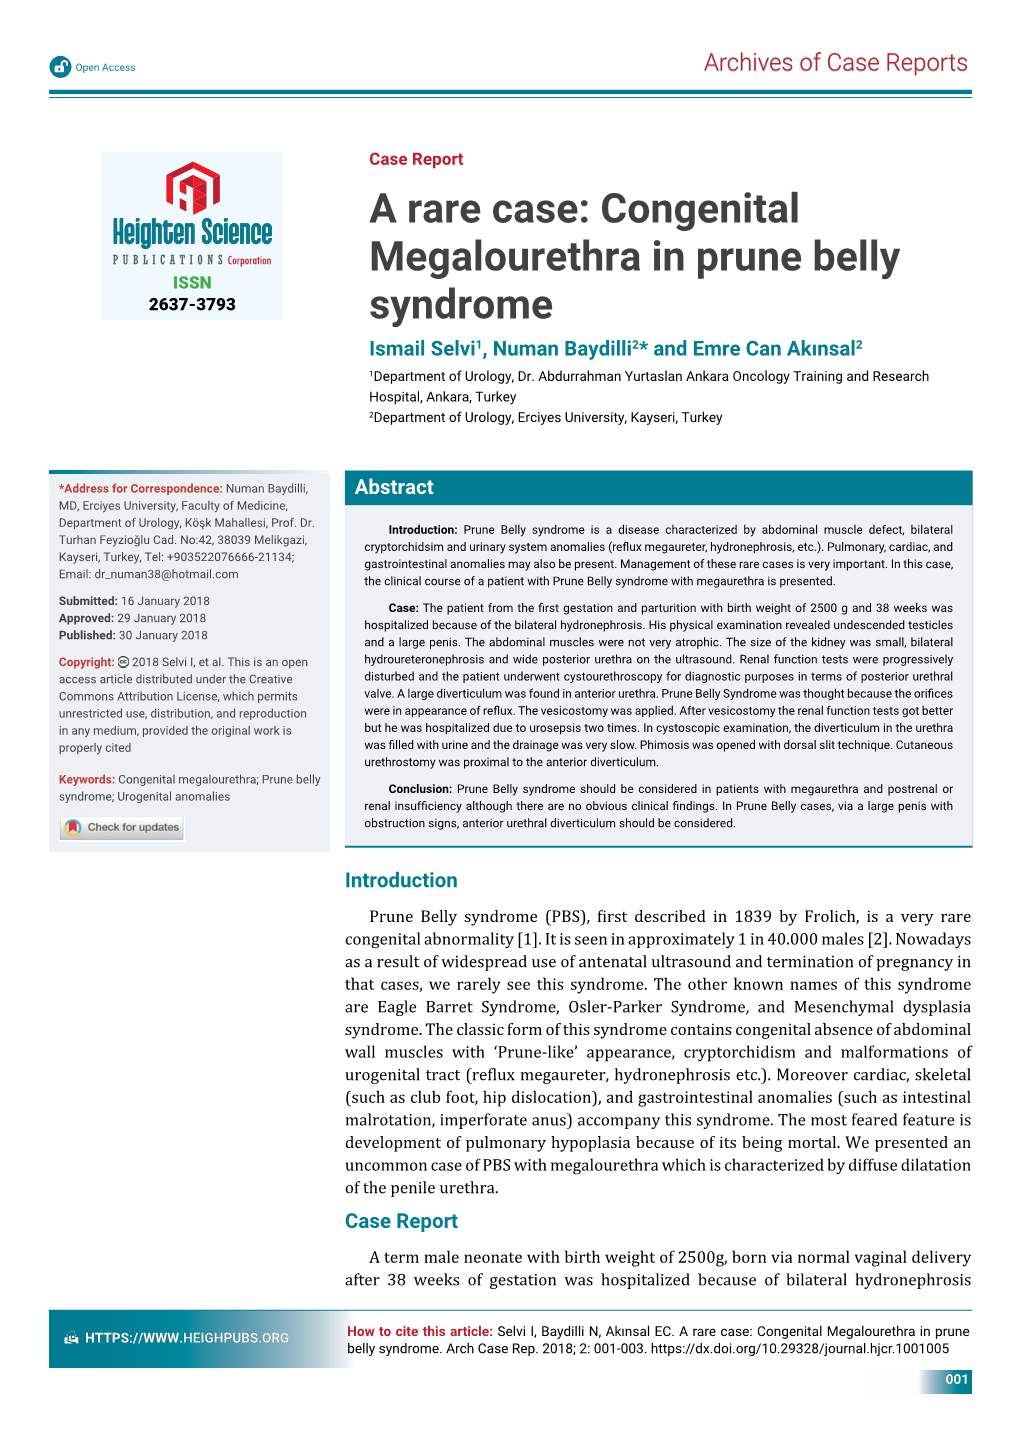 Congenital Megalourethra in Prune Belly Syndrome